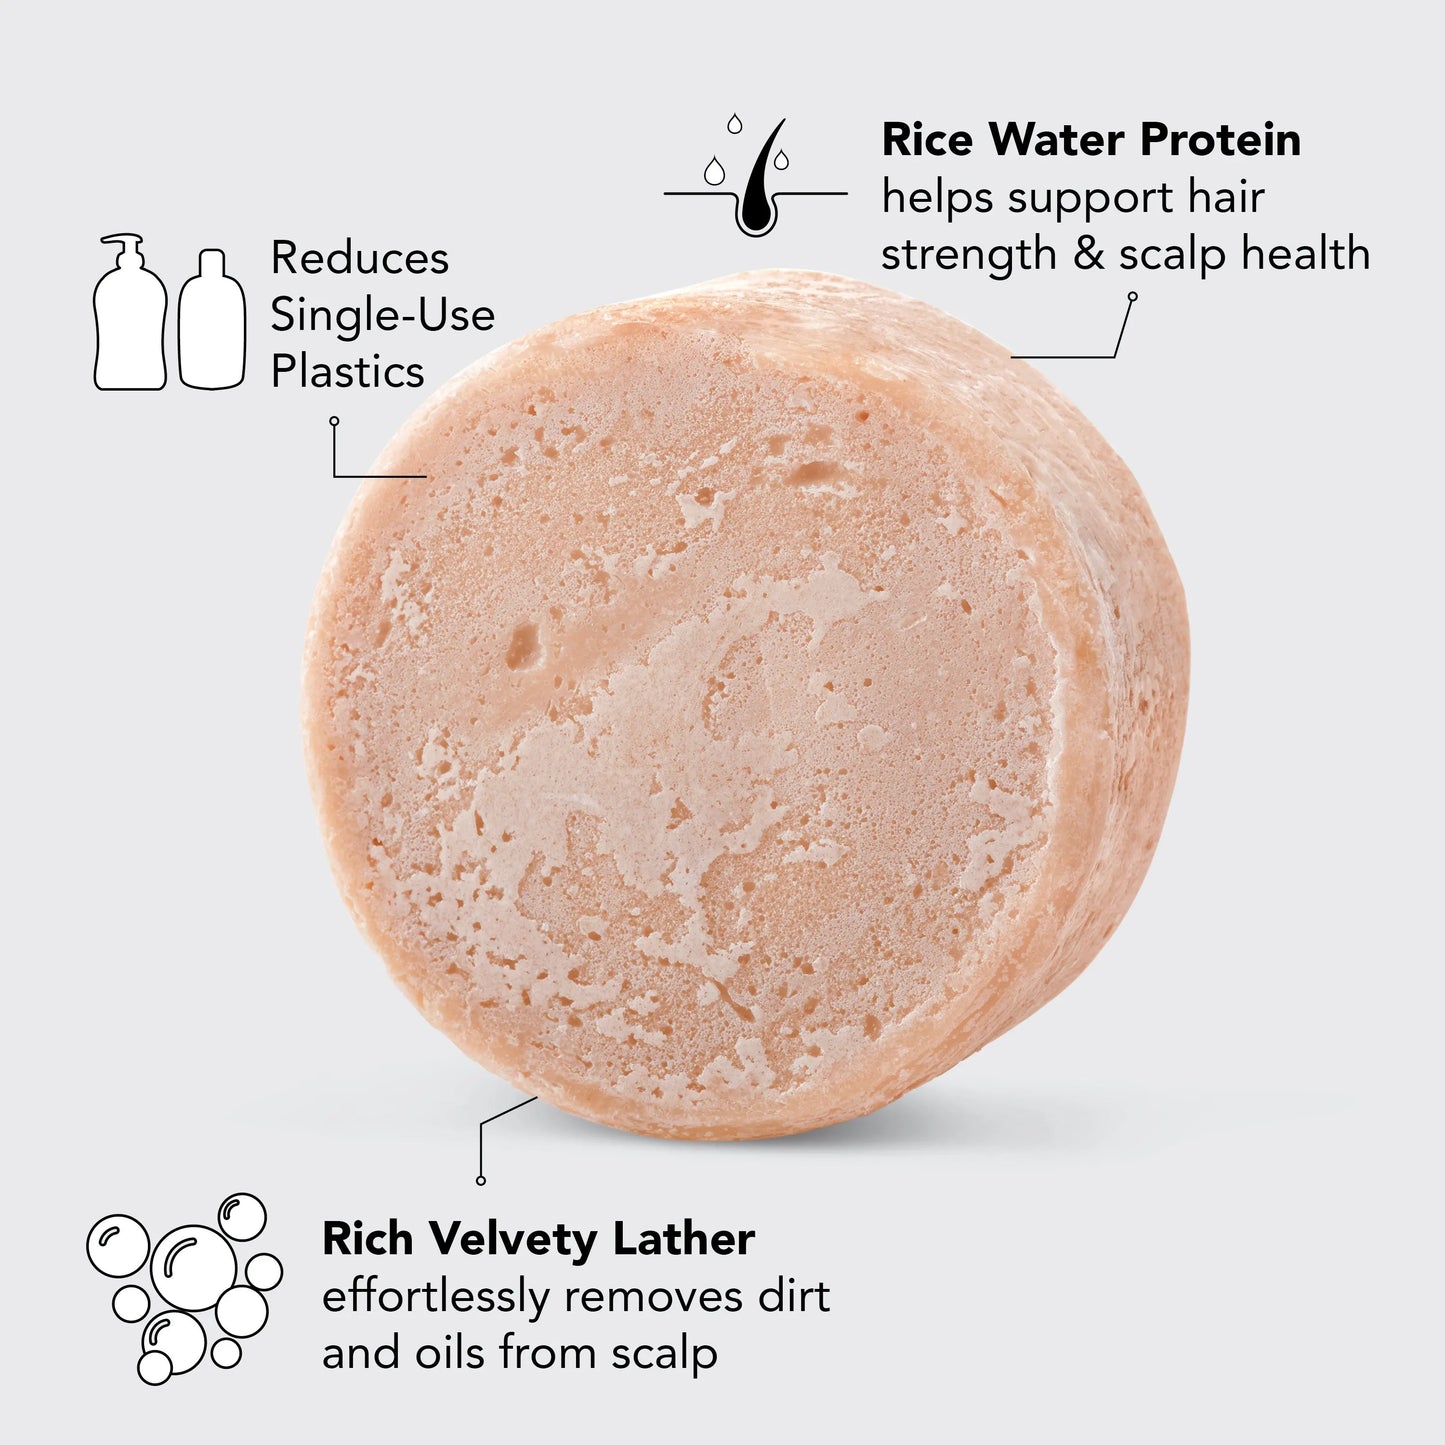 Strengthening Solid Shampoo with Rice Water Protein